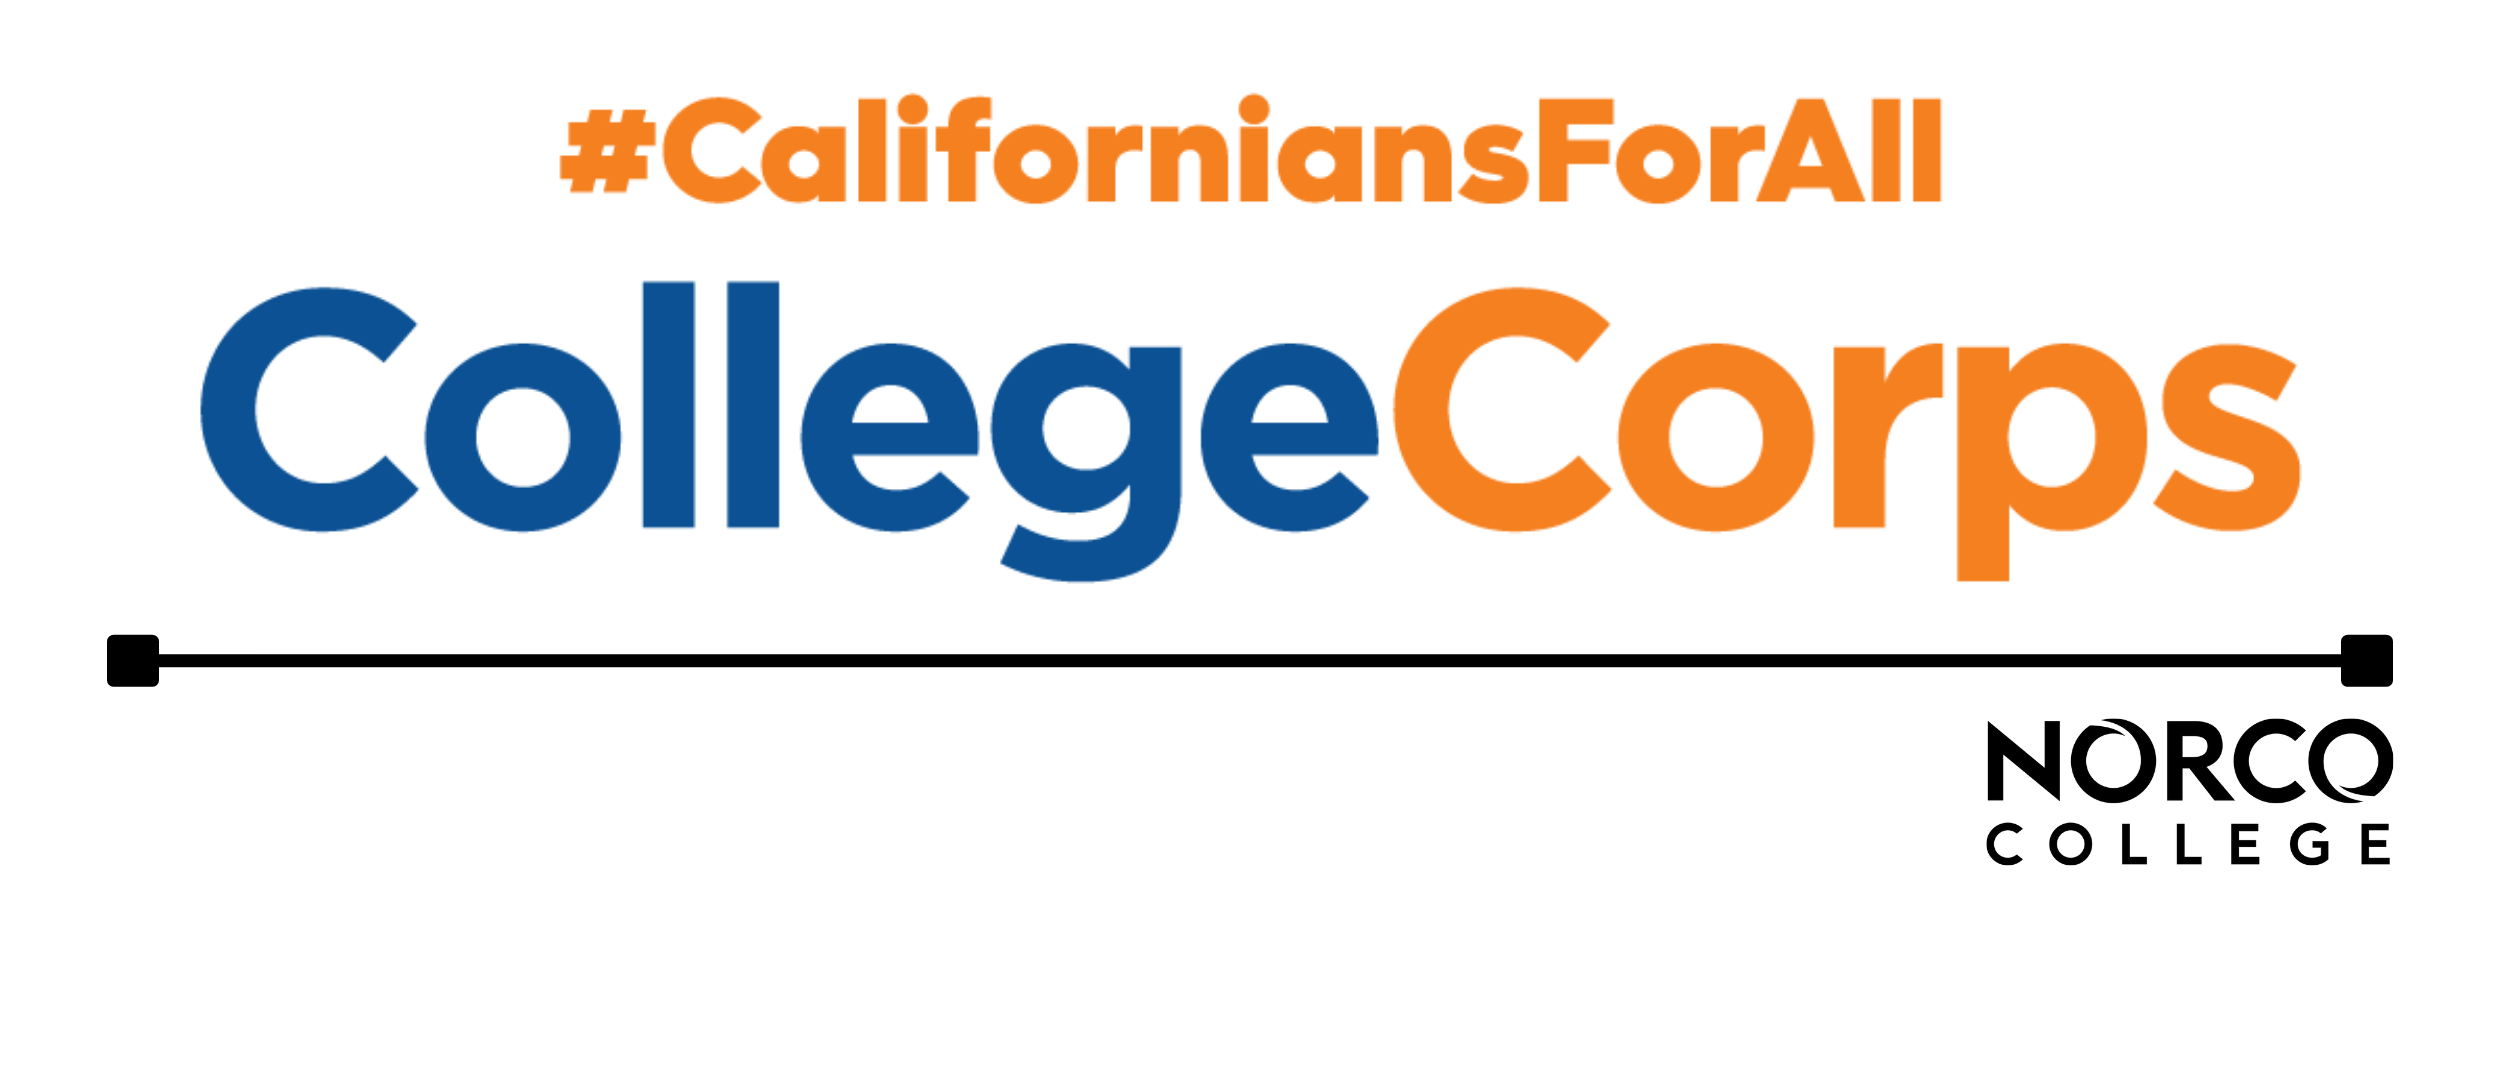 NORCO COLLEGE. June 12, PDF Free Download